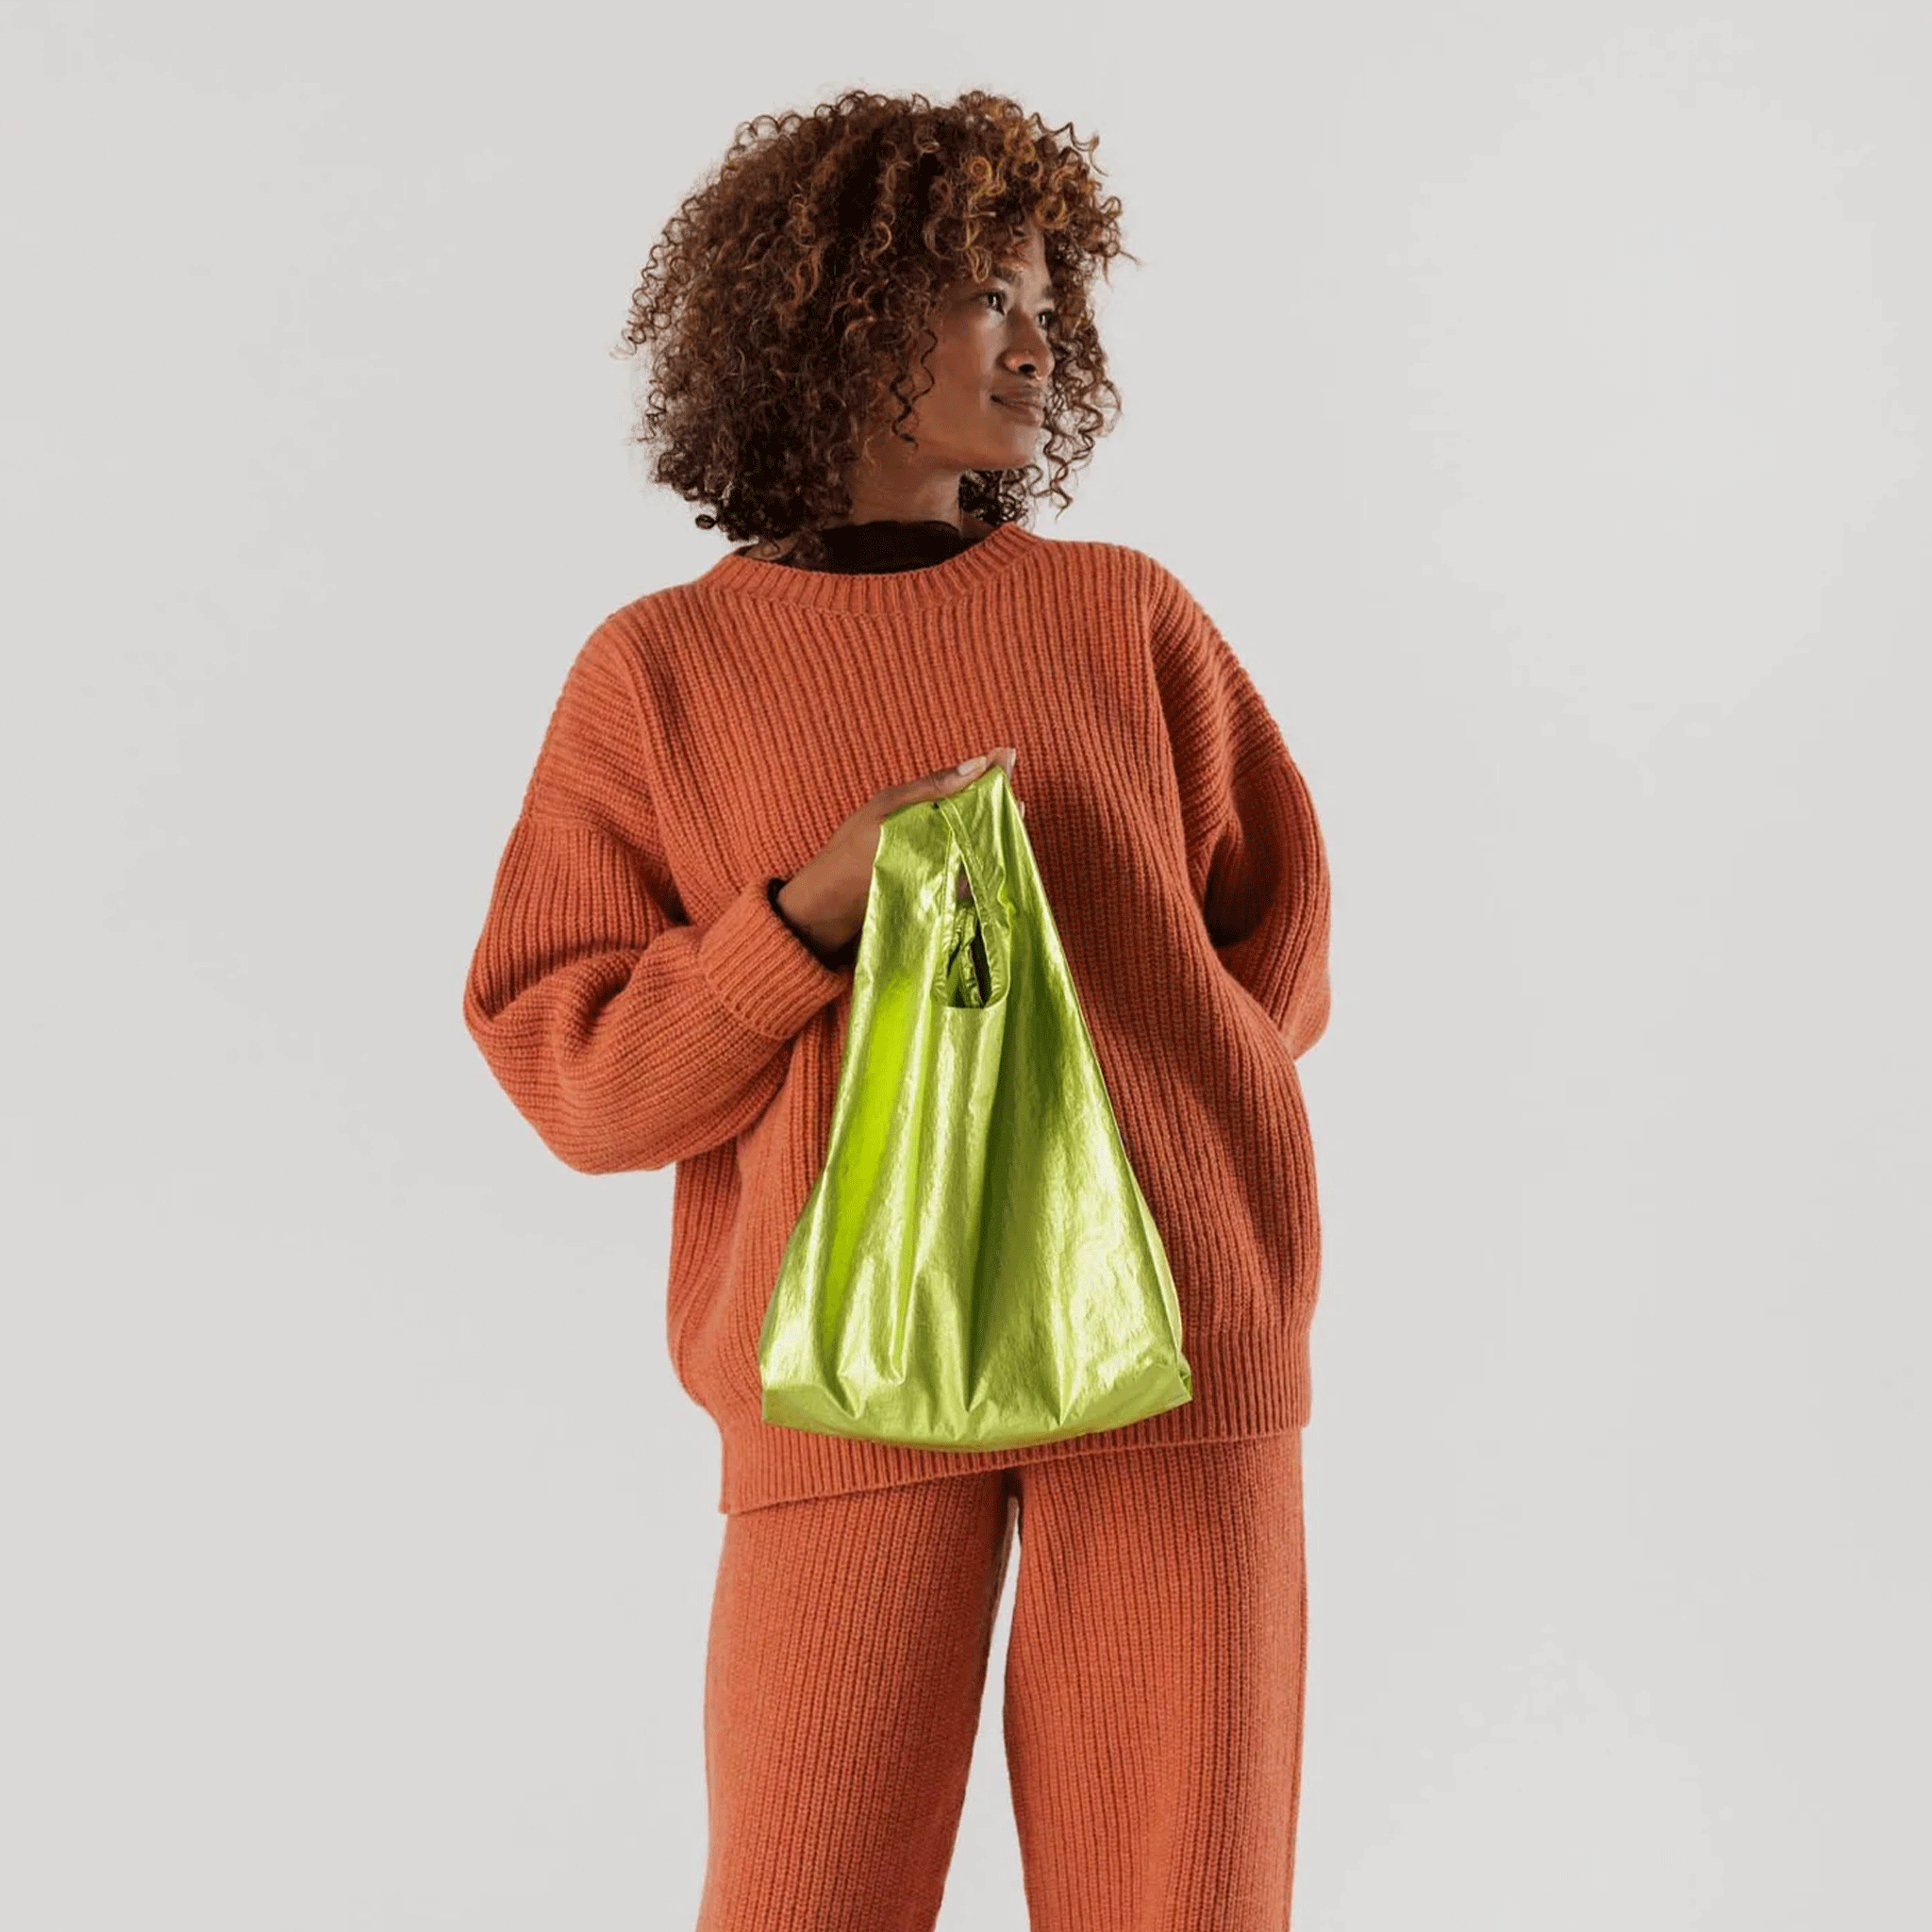 On a cream background is a model holding a neon green metallic nylon bag. 